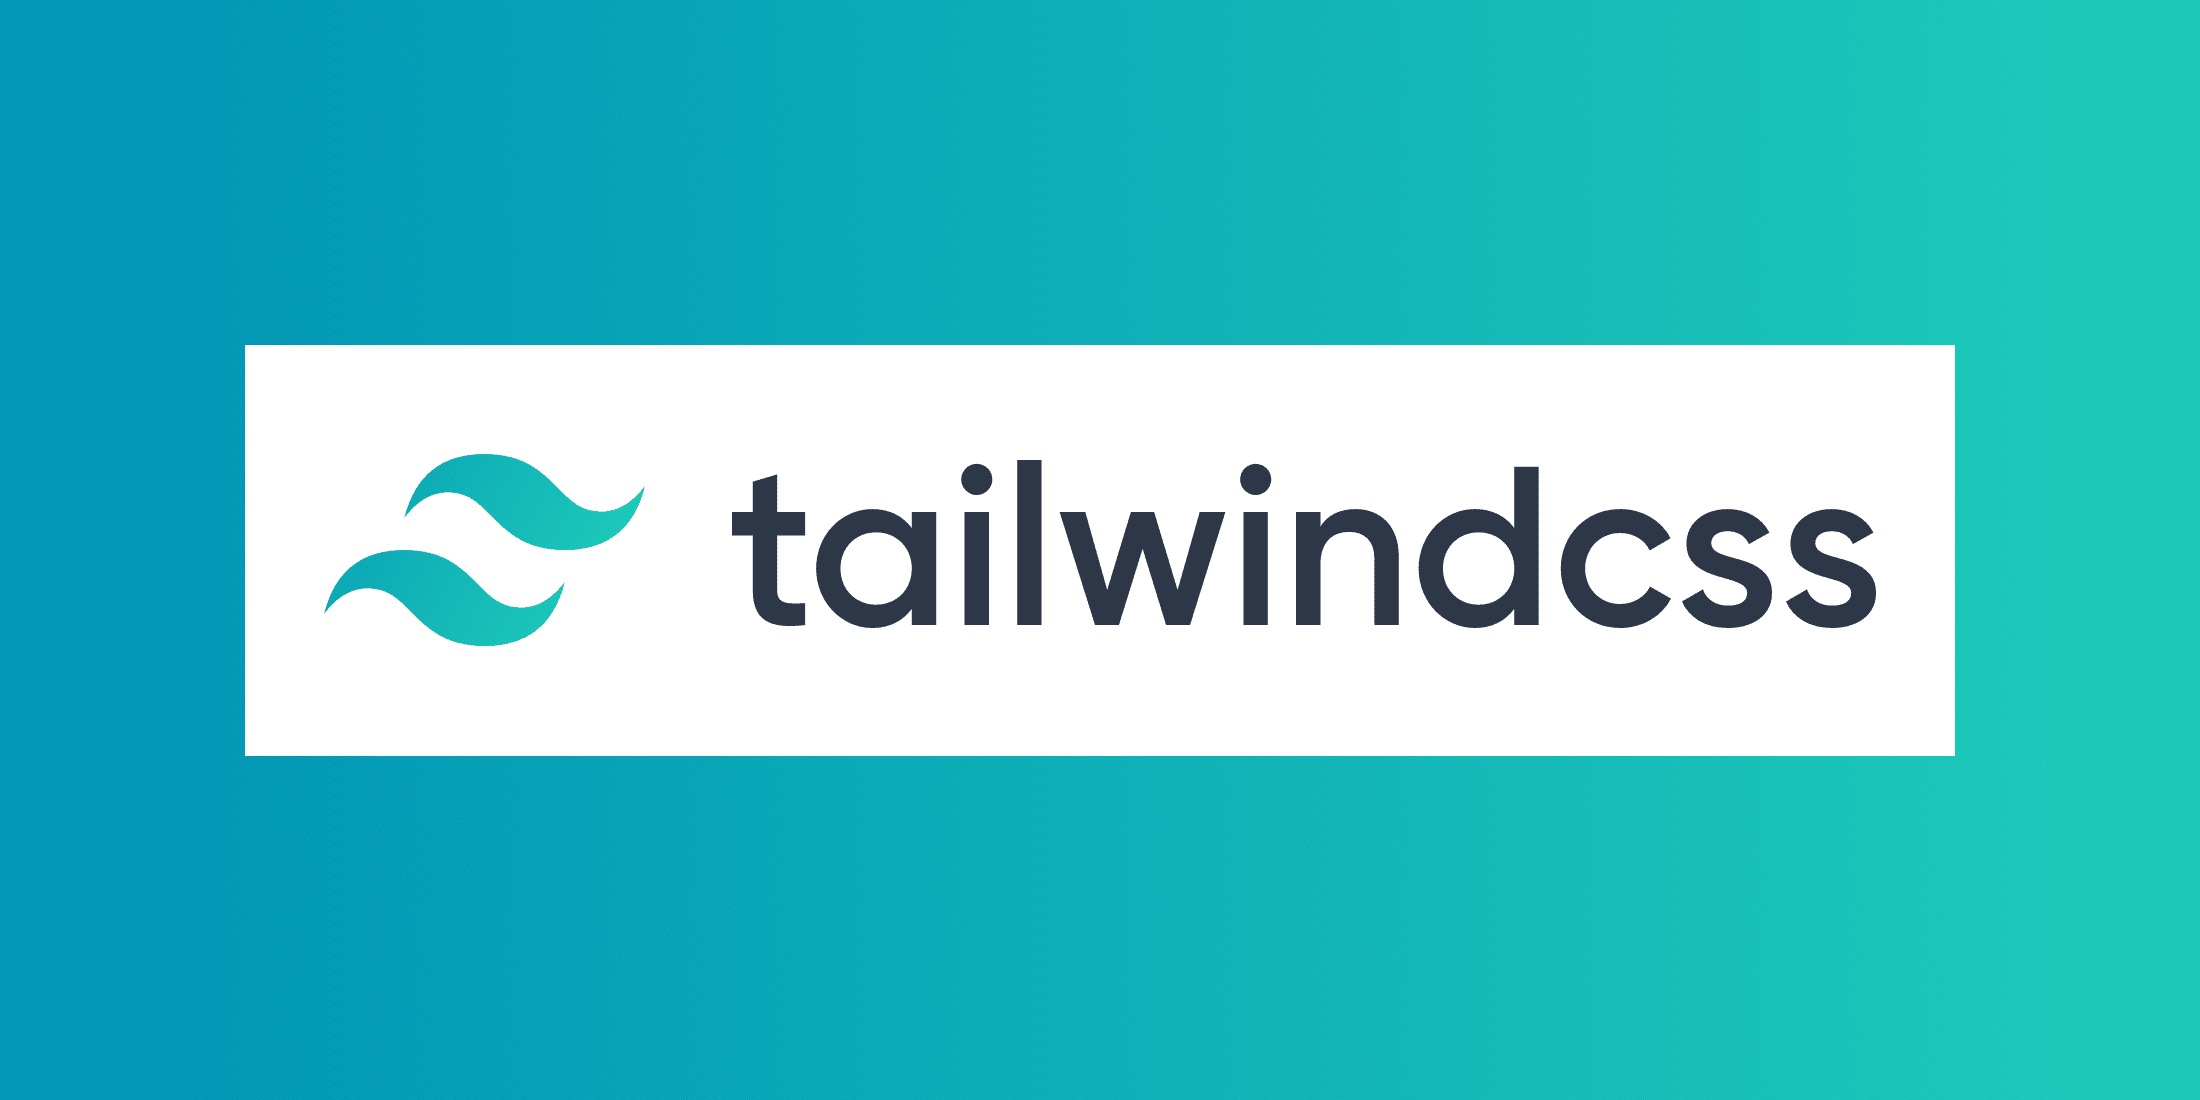 Get started with TailwindCSS